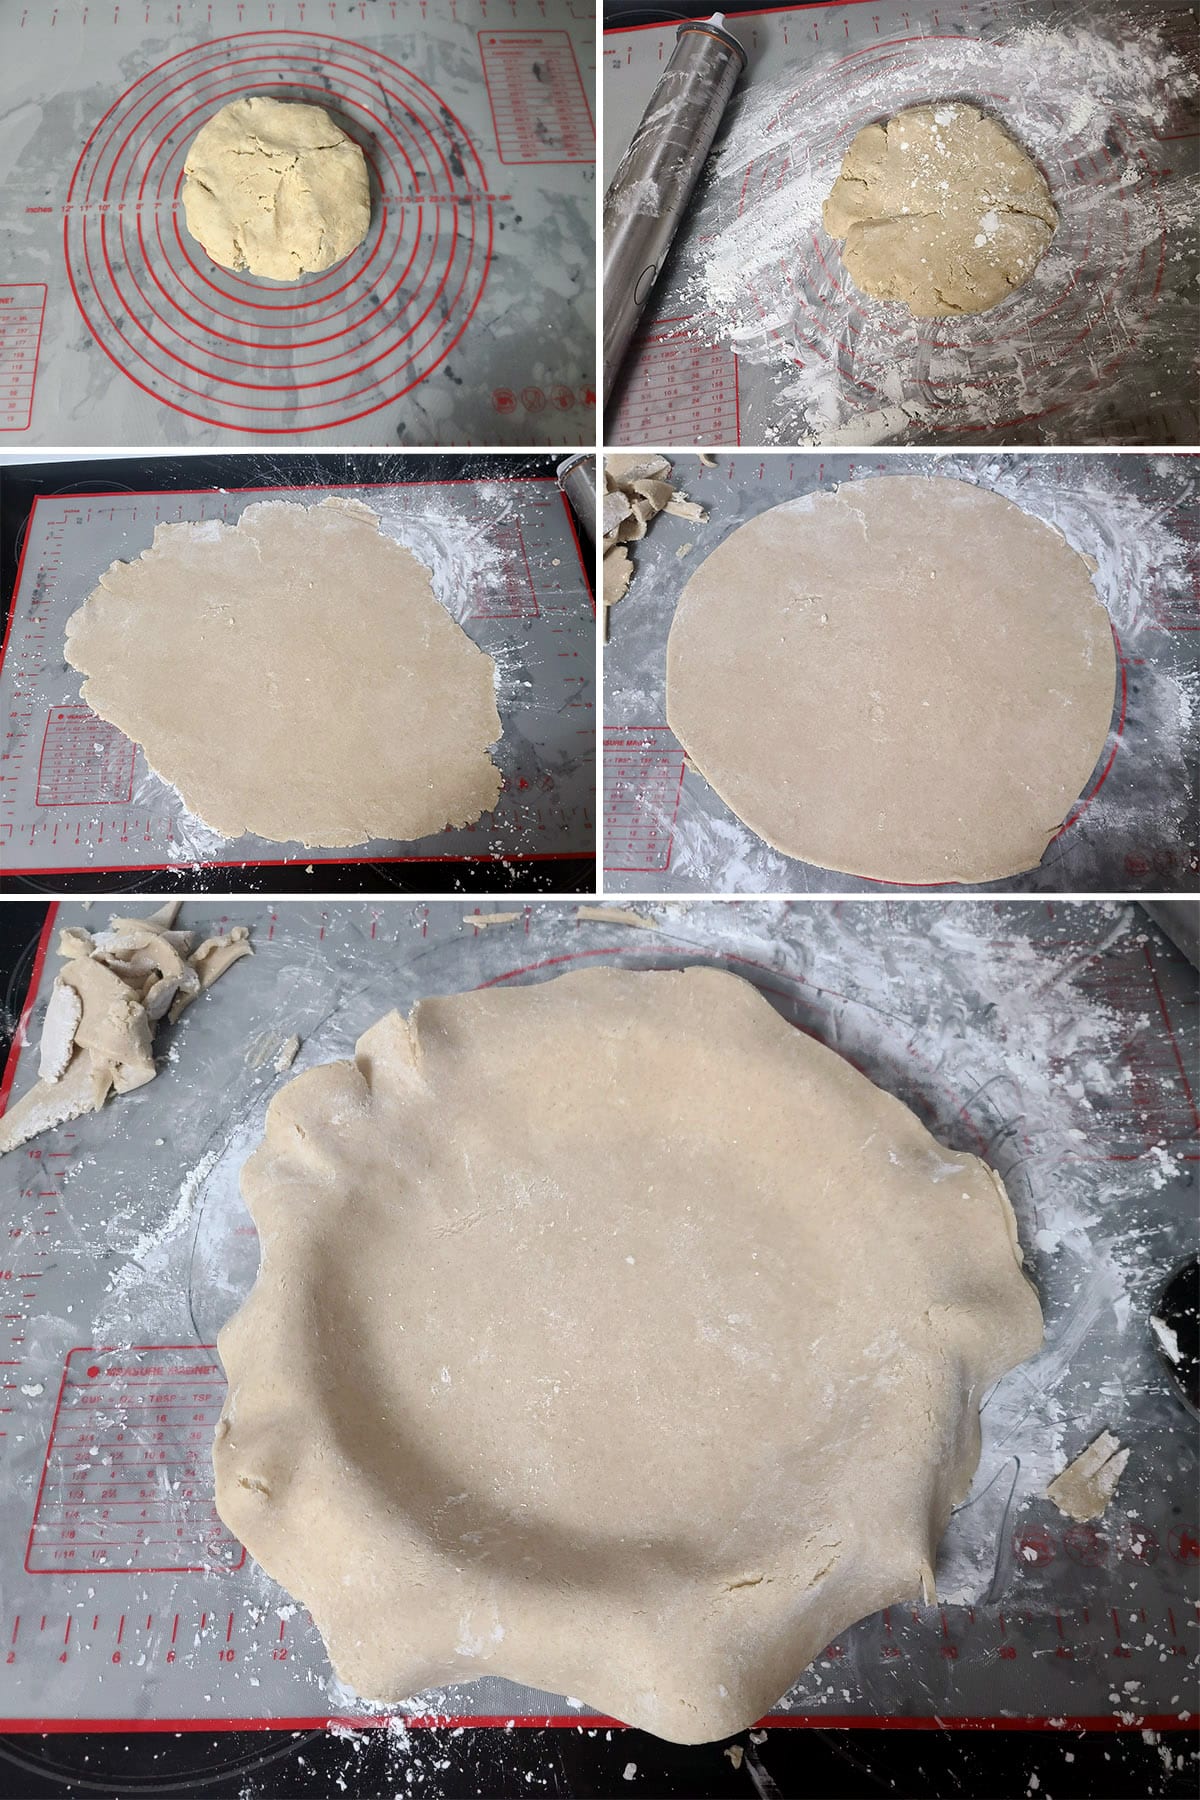 A 5 part image showing the gluten free pie crust being rolled out and put in a pie plate.